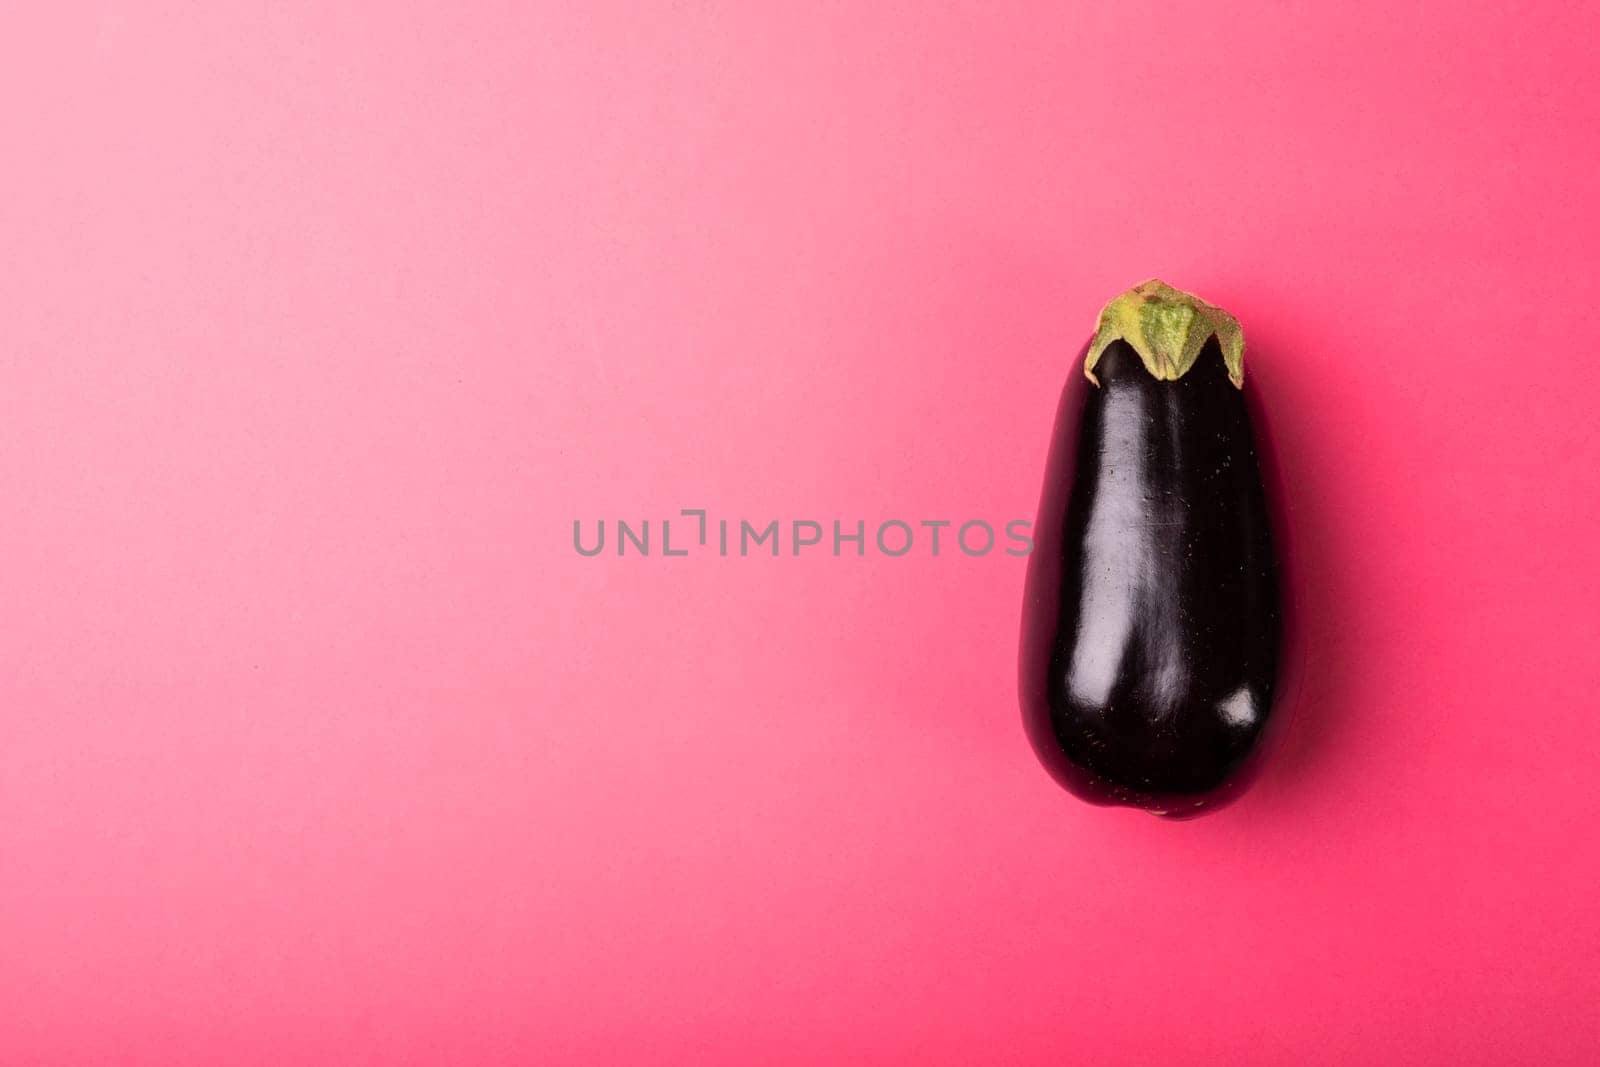 Overhead view of fresh eggplant by copy space against pink background by Wavebreakmedia